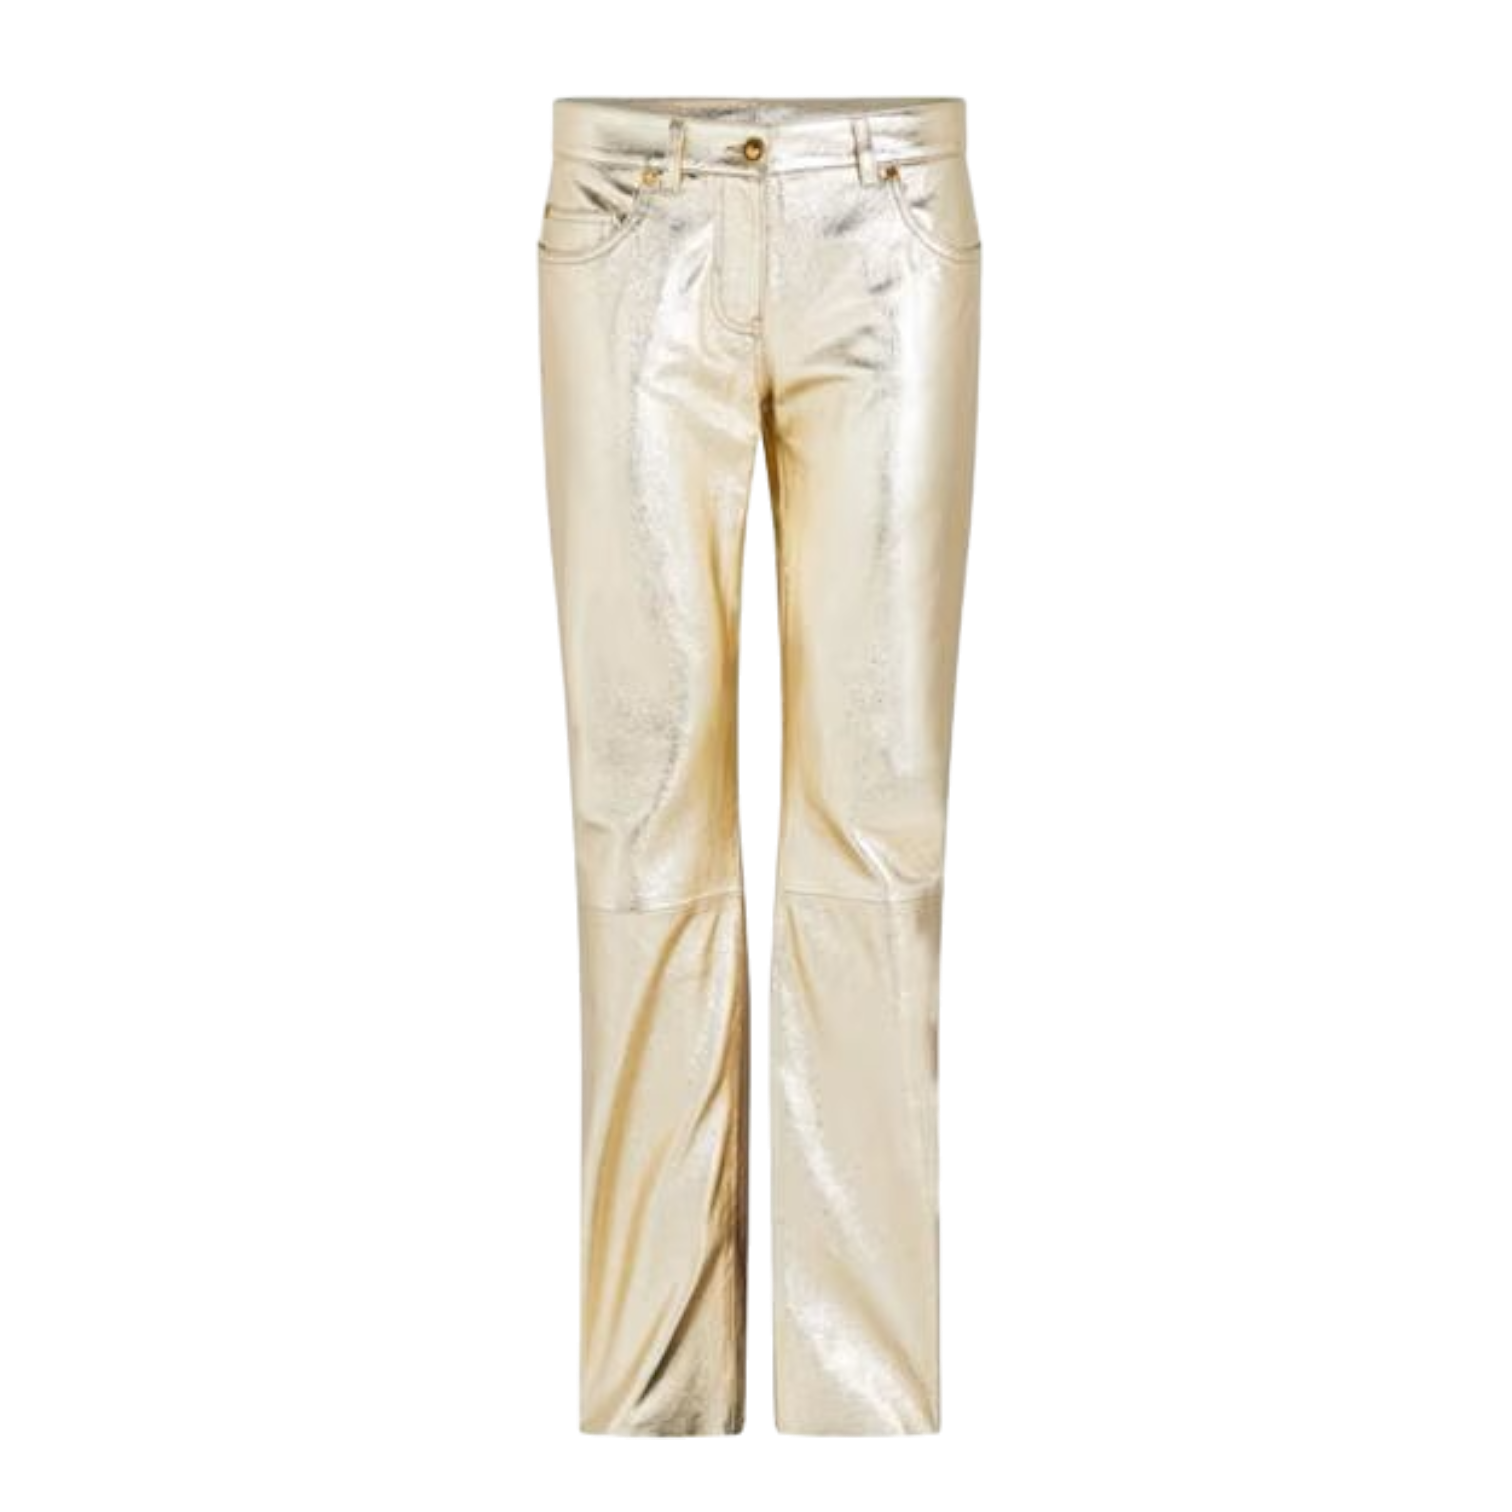 LUXURY HUB PALM ANGELS LAMINATED LEATHER TROUSERS